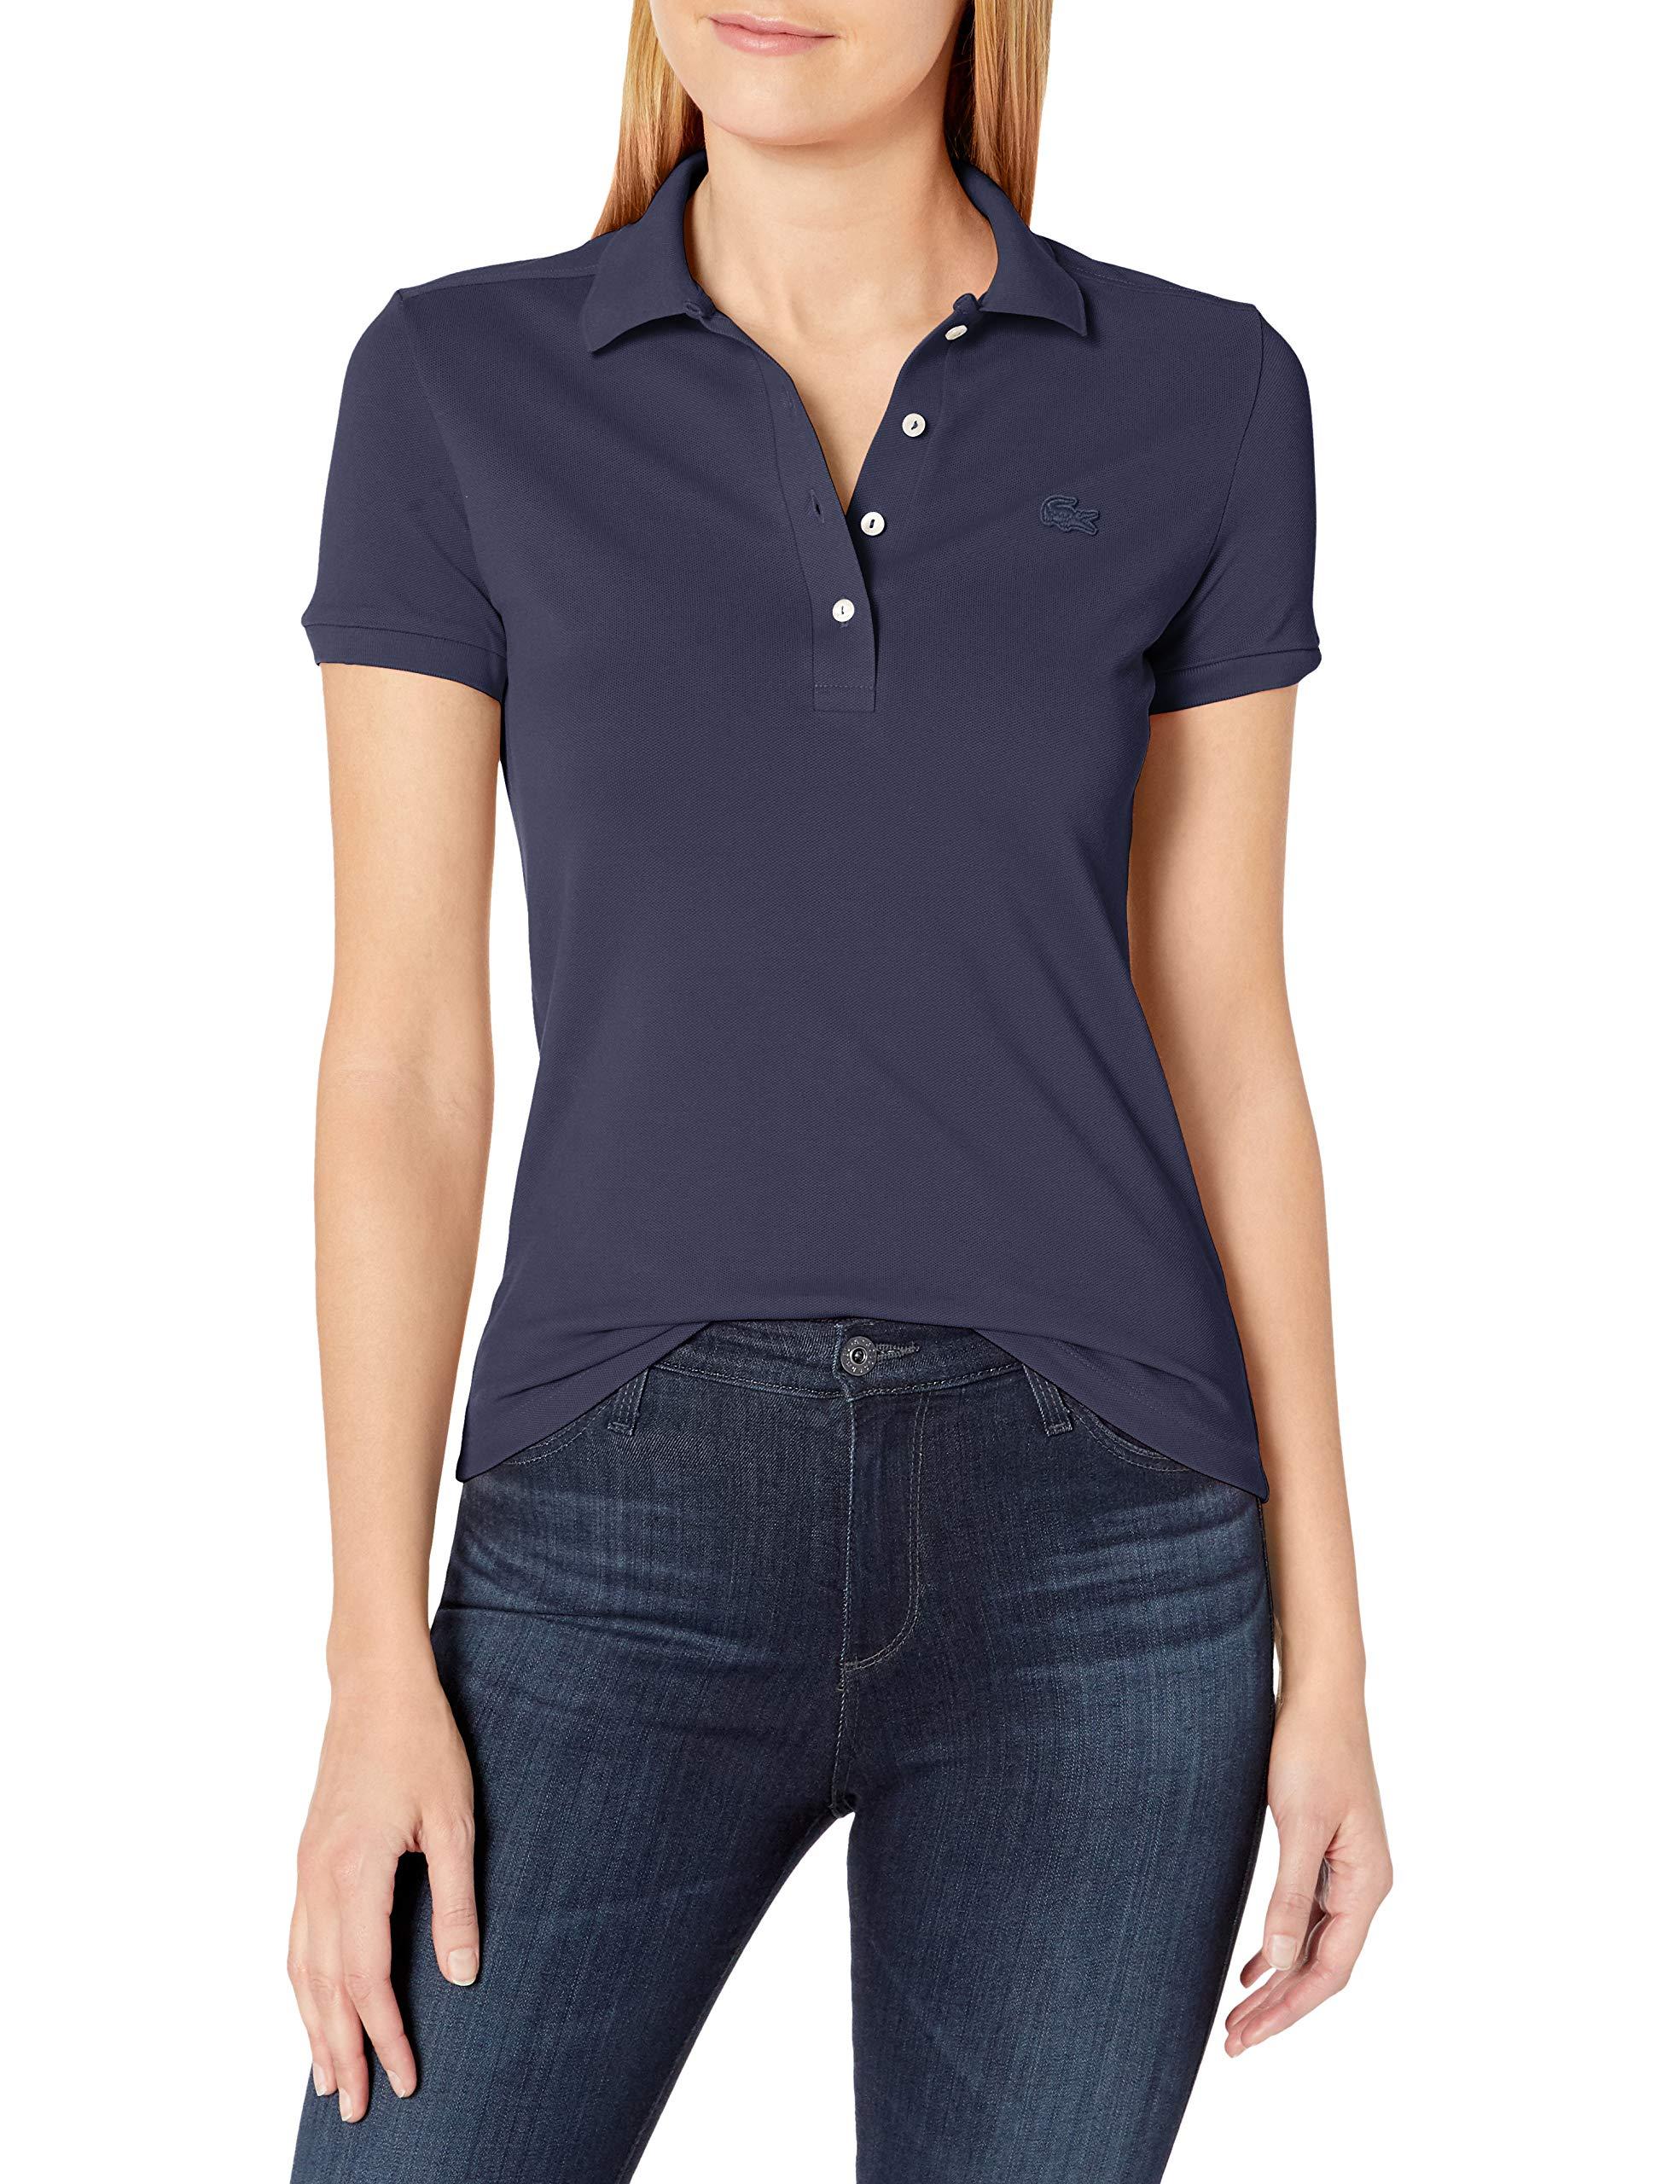 Lacoste Classic Short Sleeve Slim Fit Stretch Pique Polo in Deep Navy ...